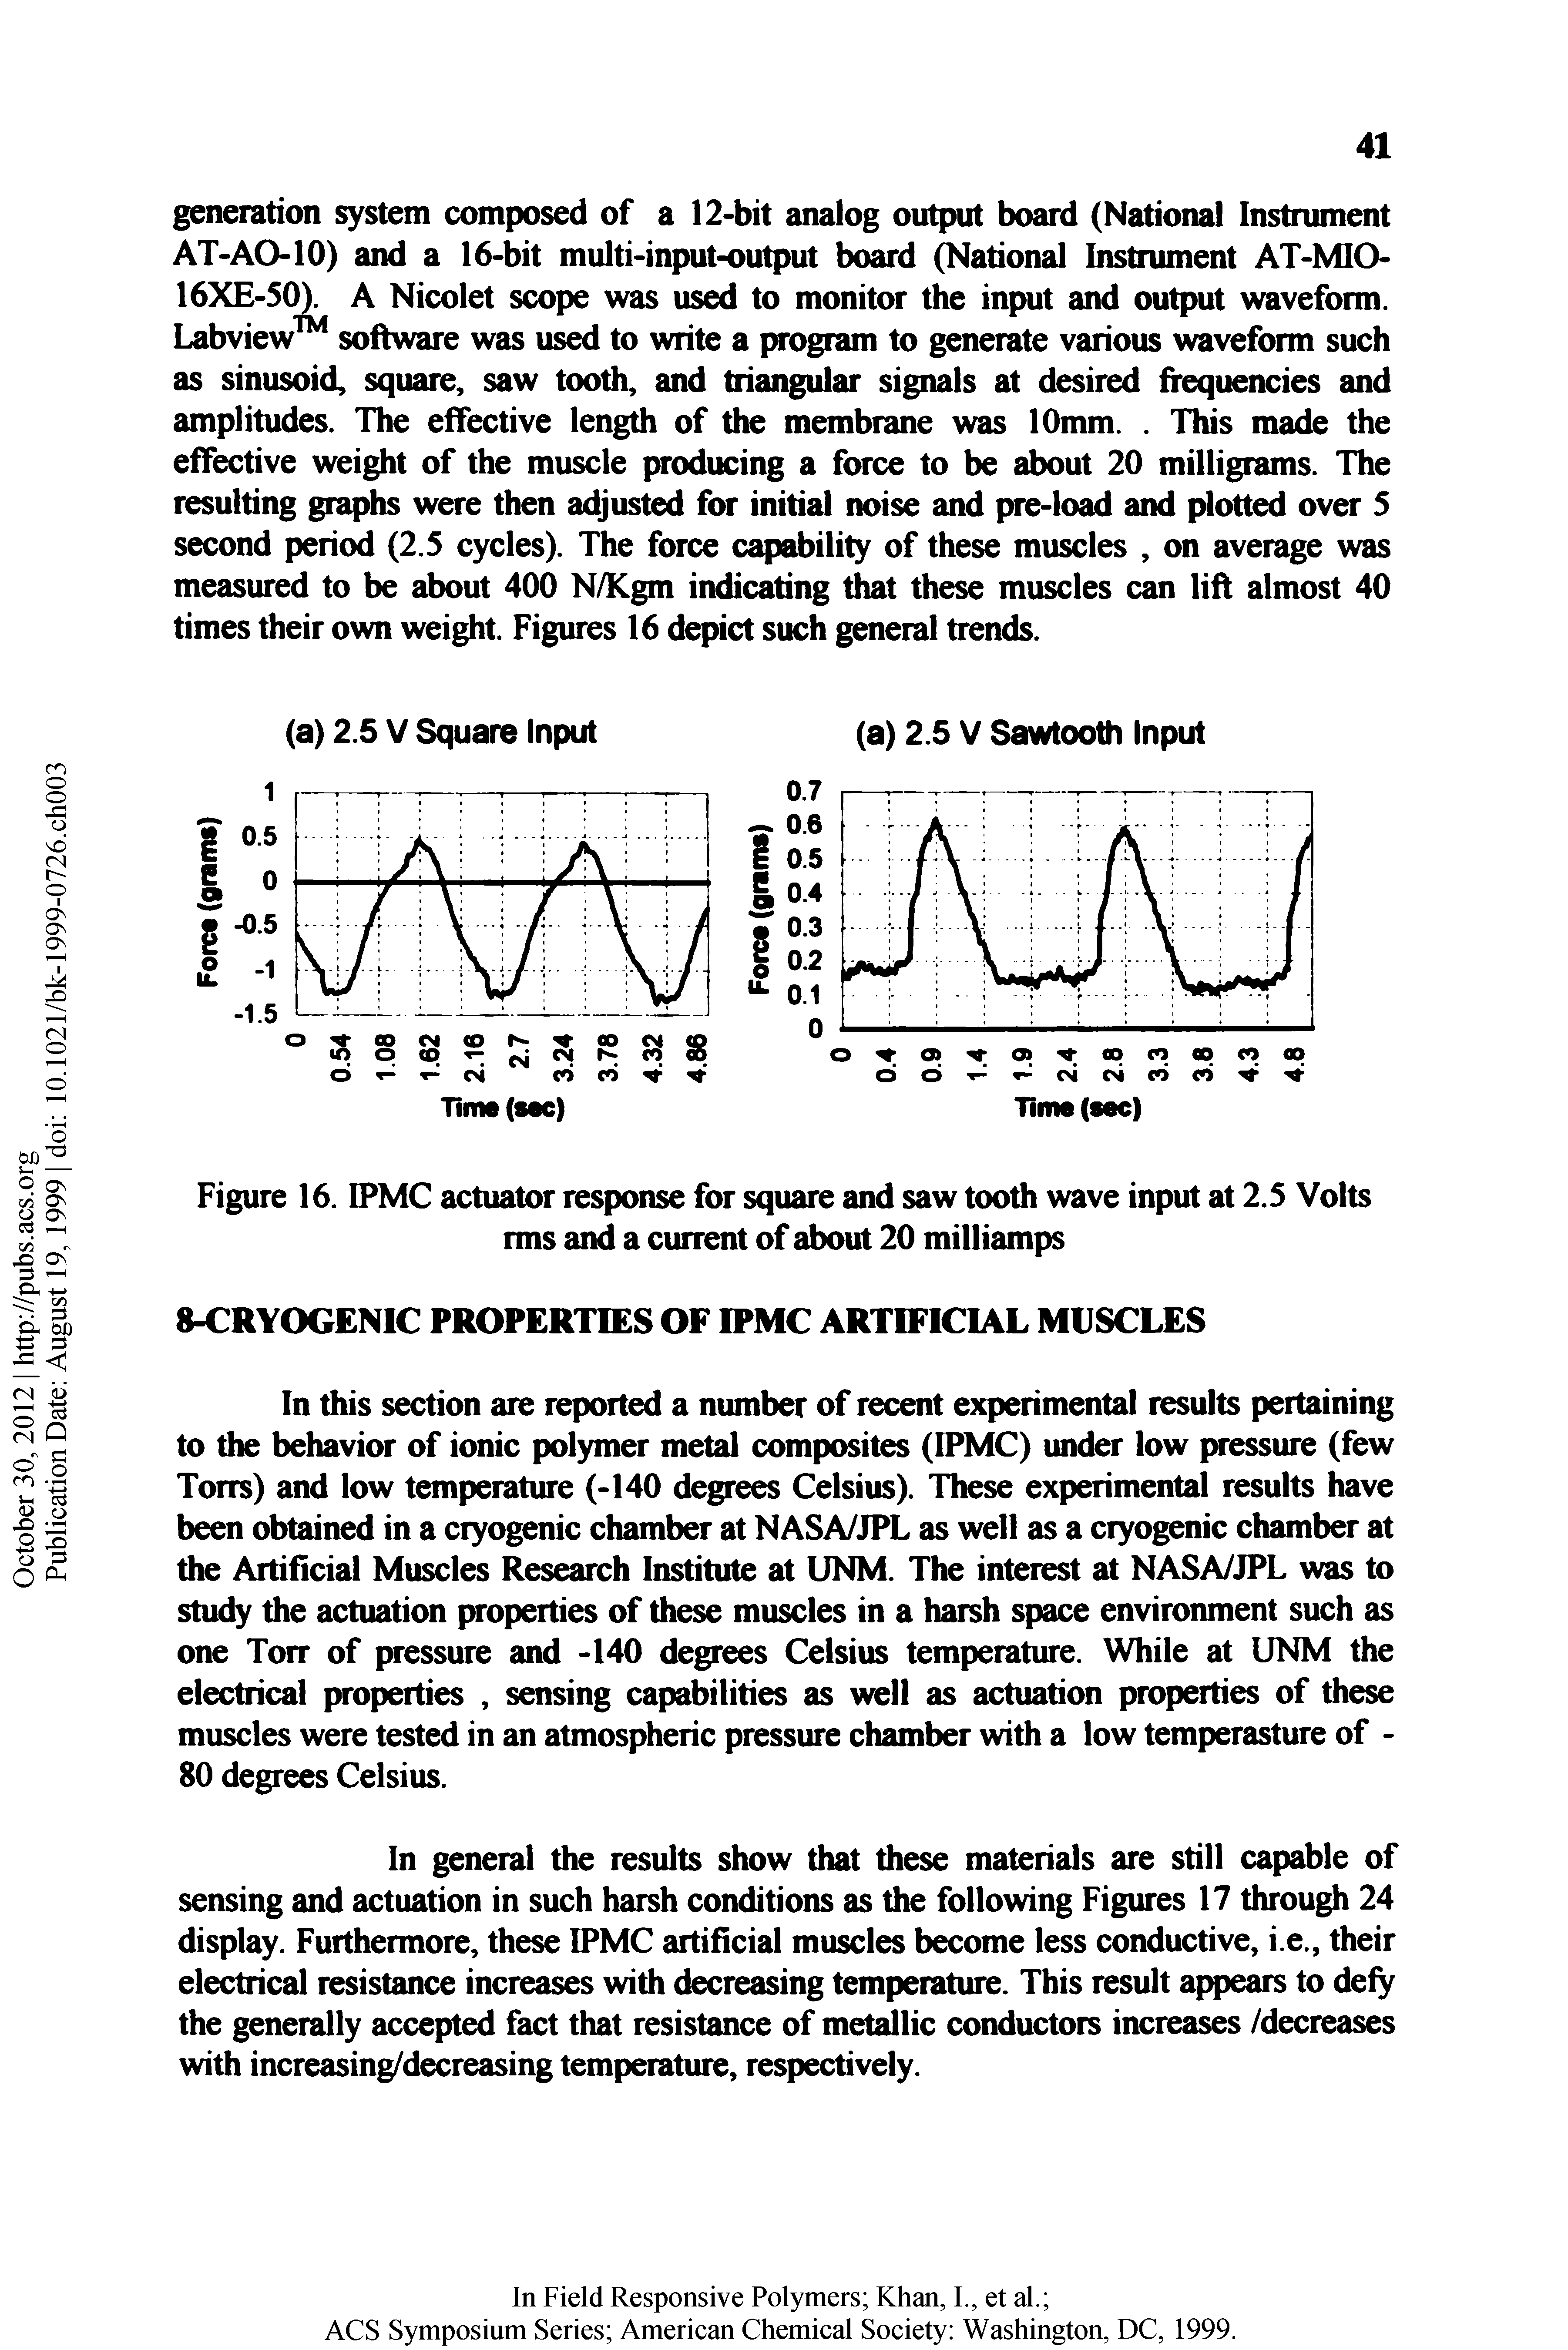 Figure 16. IPMC actuator response for square and saw tooth wave input at 2.5 Volts rms and a current of about 20 milliamps...